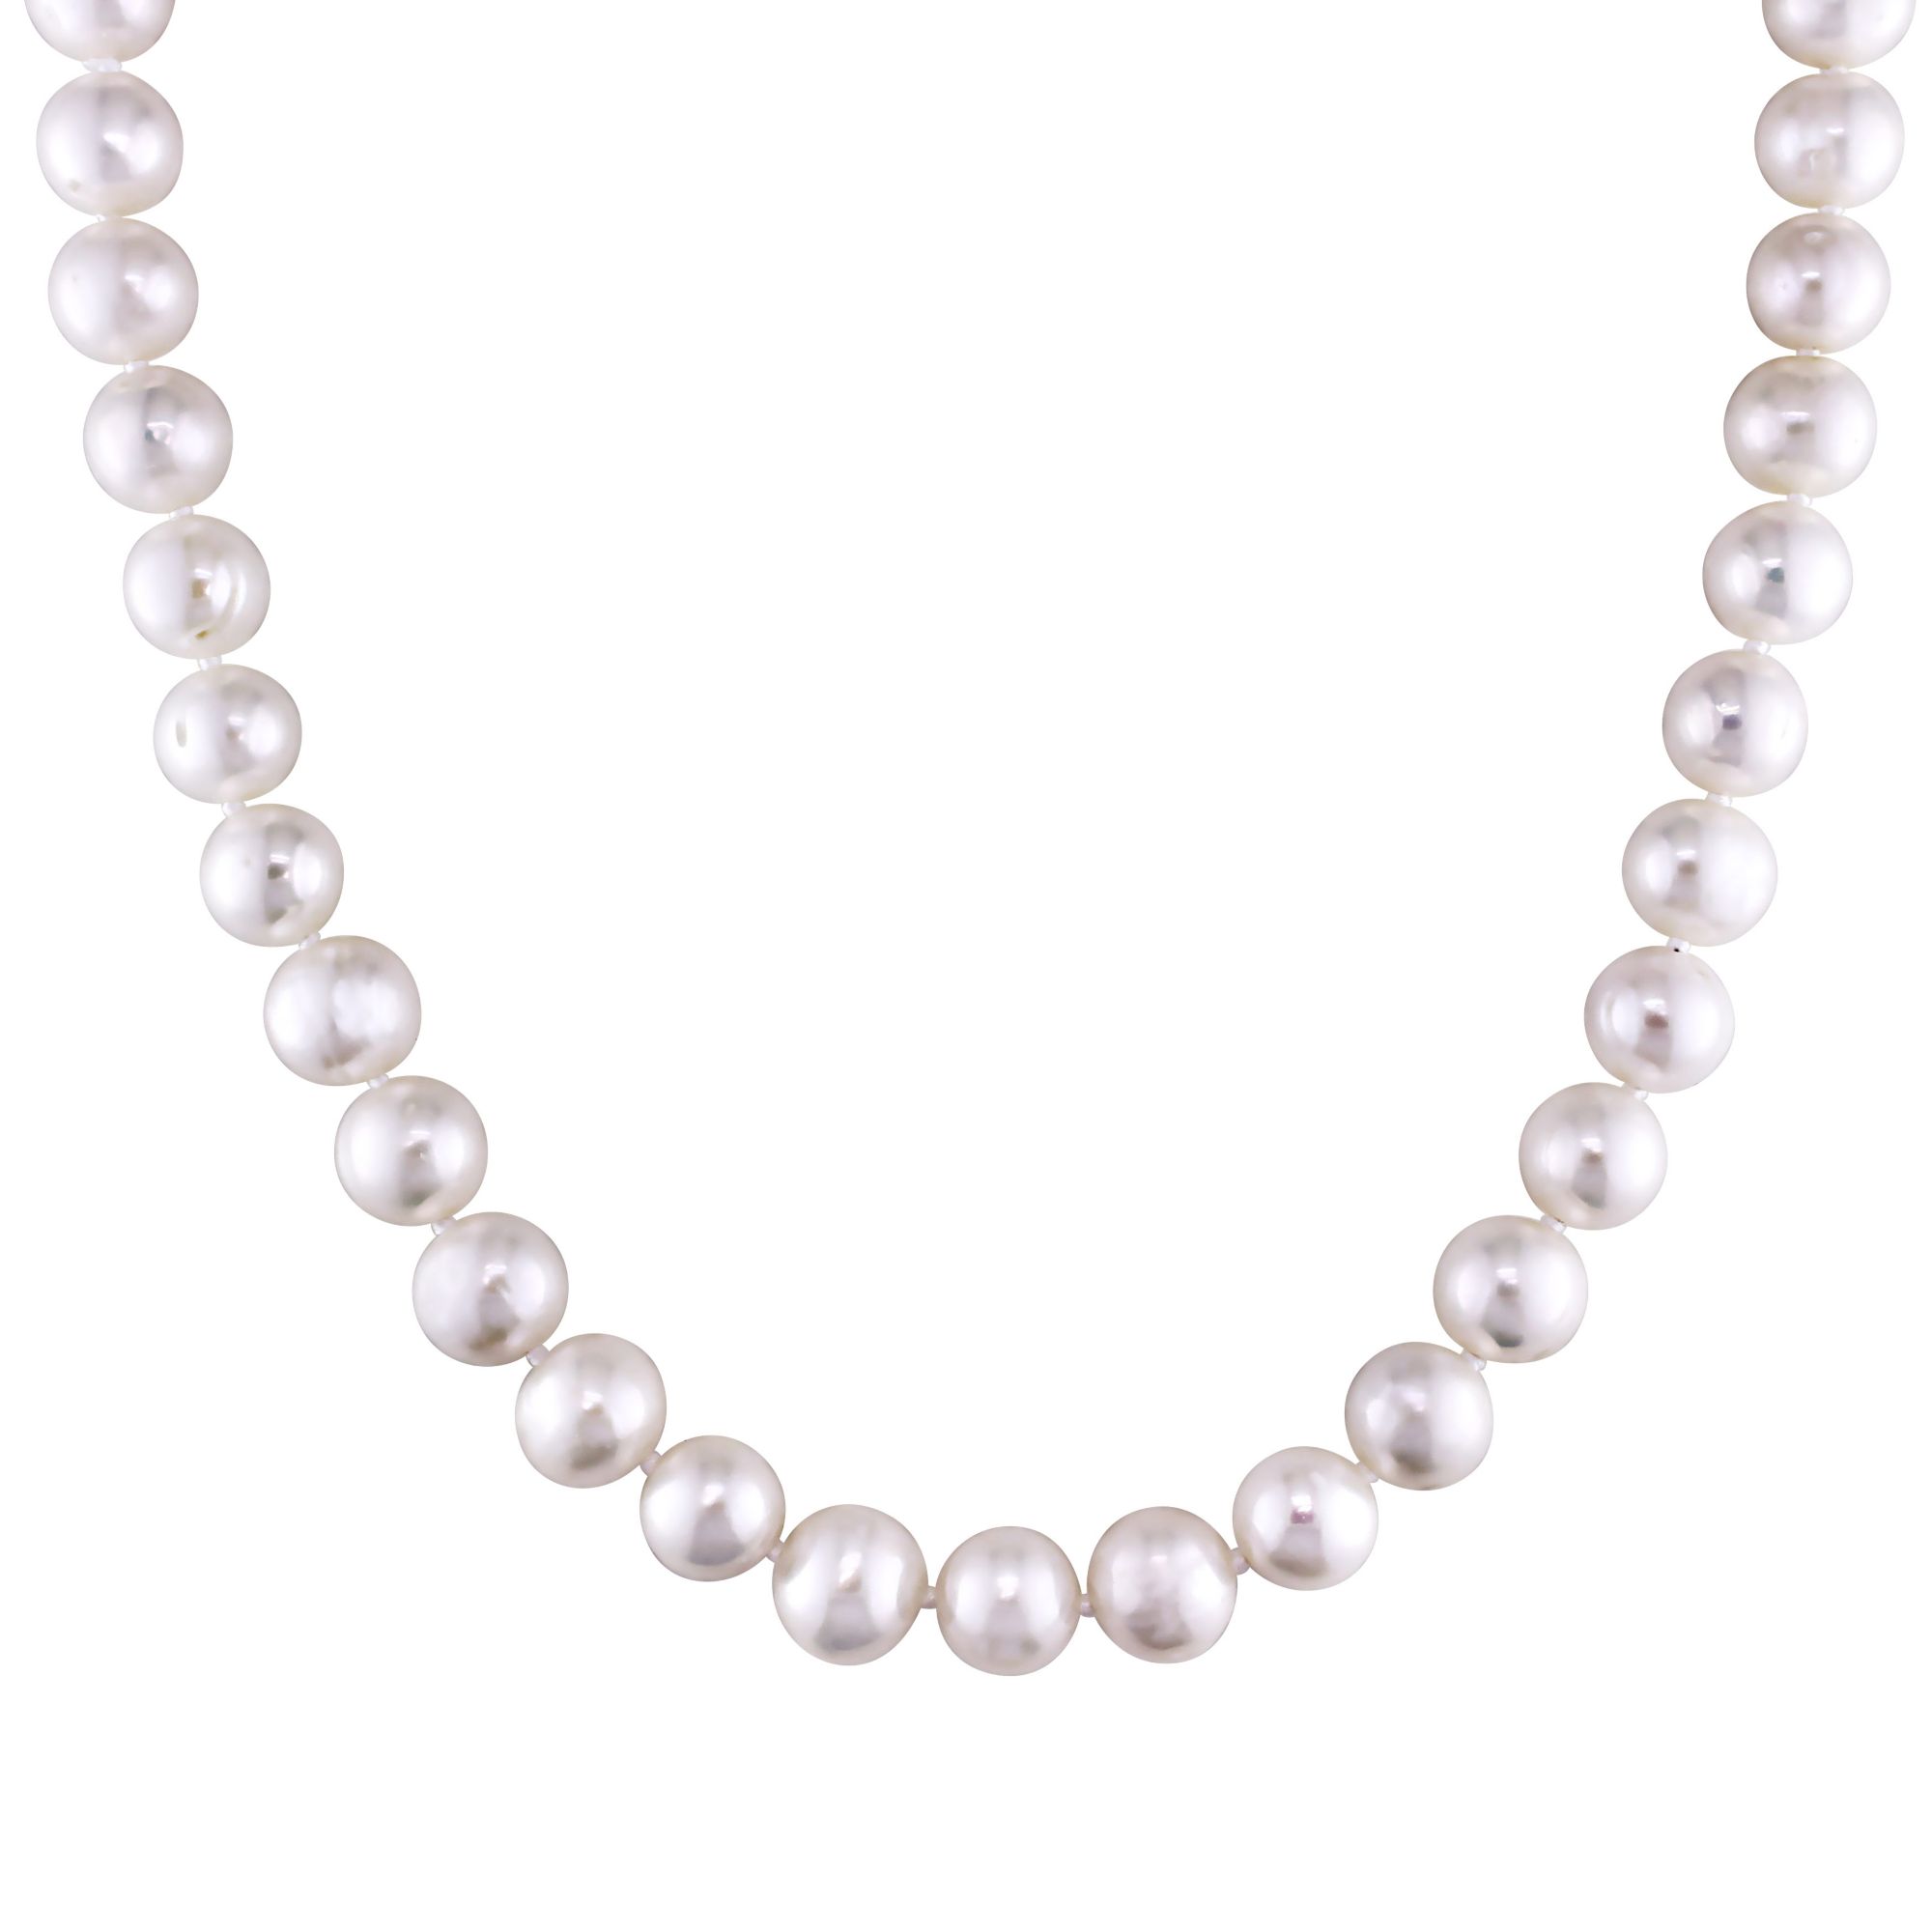 16 7.5-8mm Double Strand Pearl Necklace with 14K White Gold Decorative Clasp